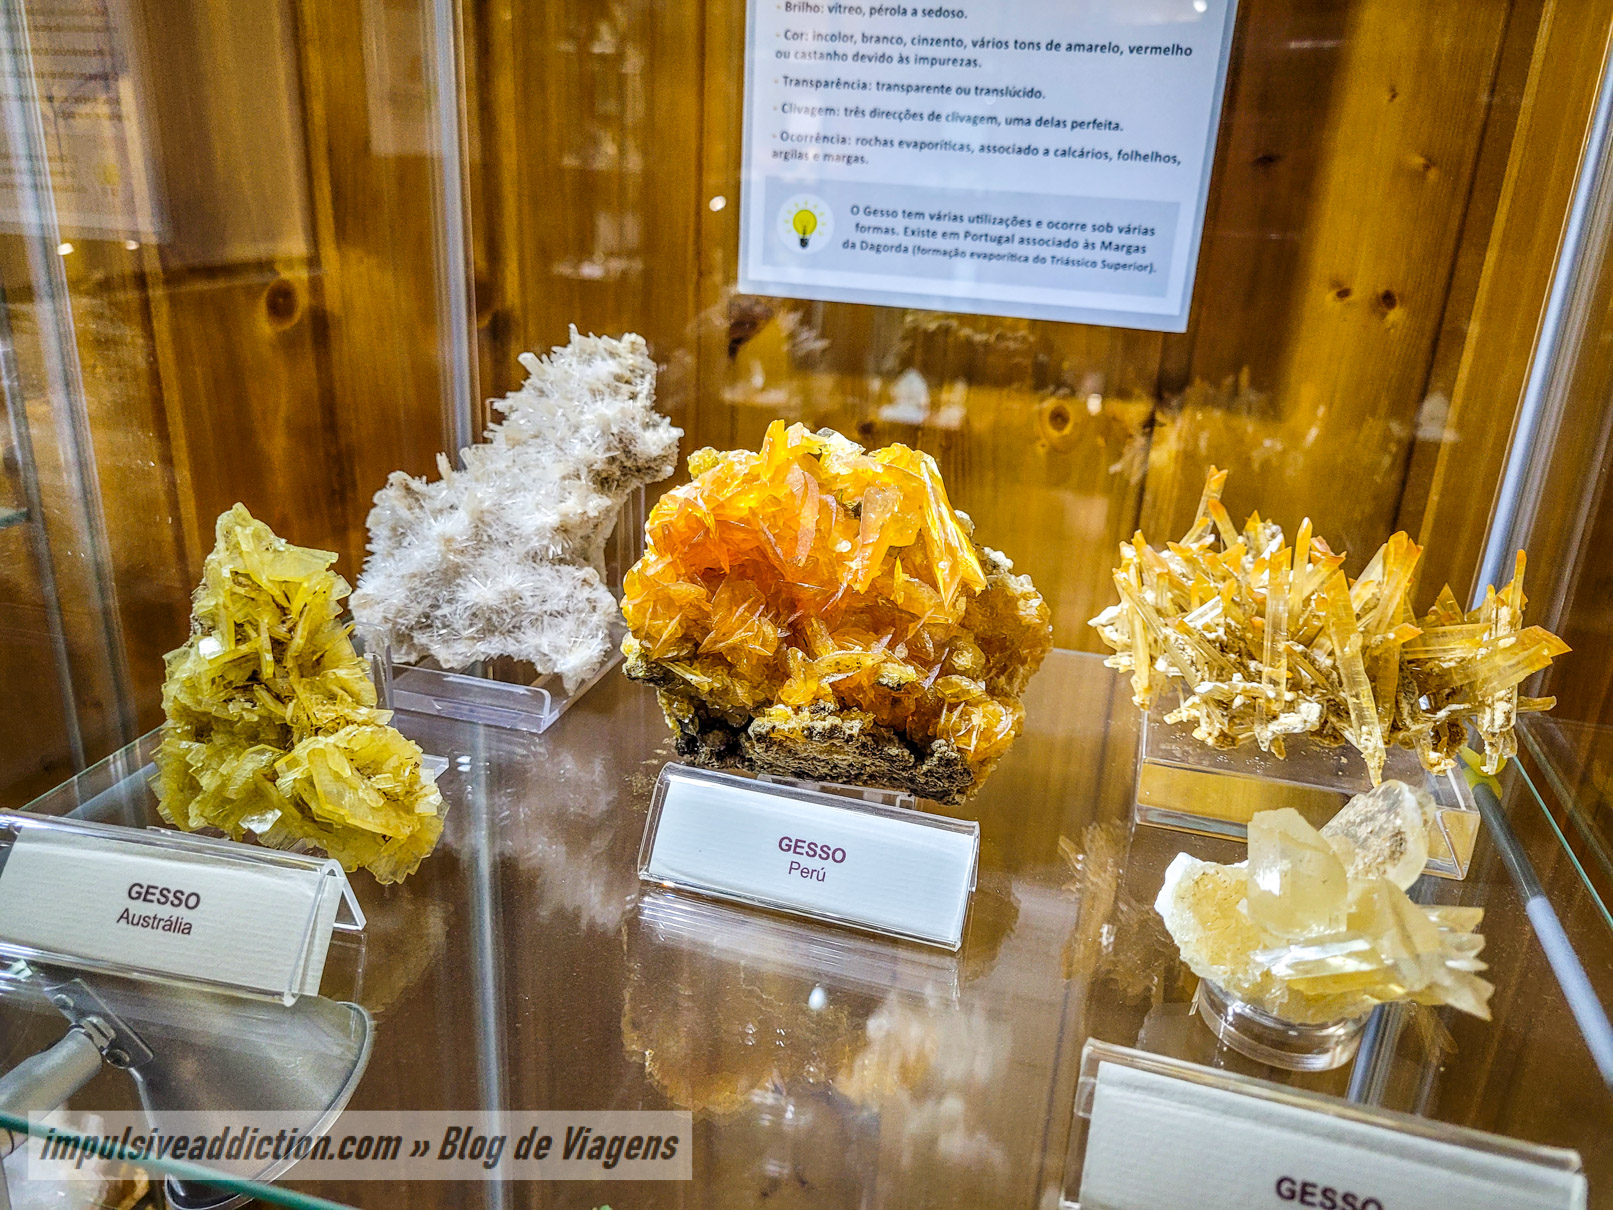 Exhibition of minerals from the Coin Caves